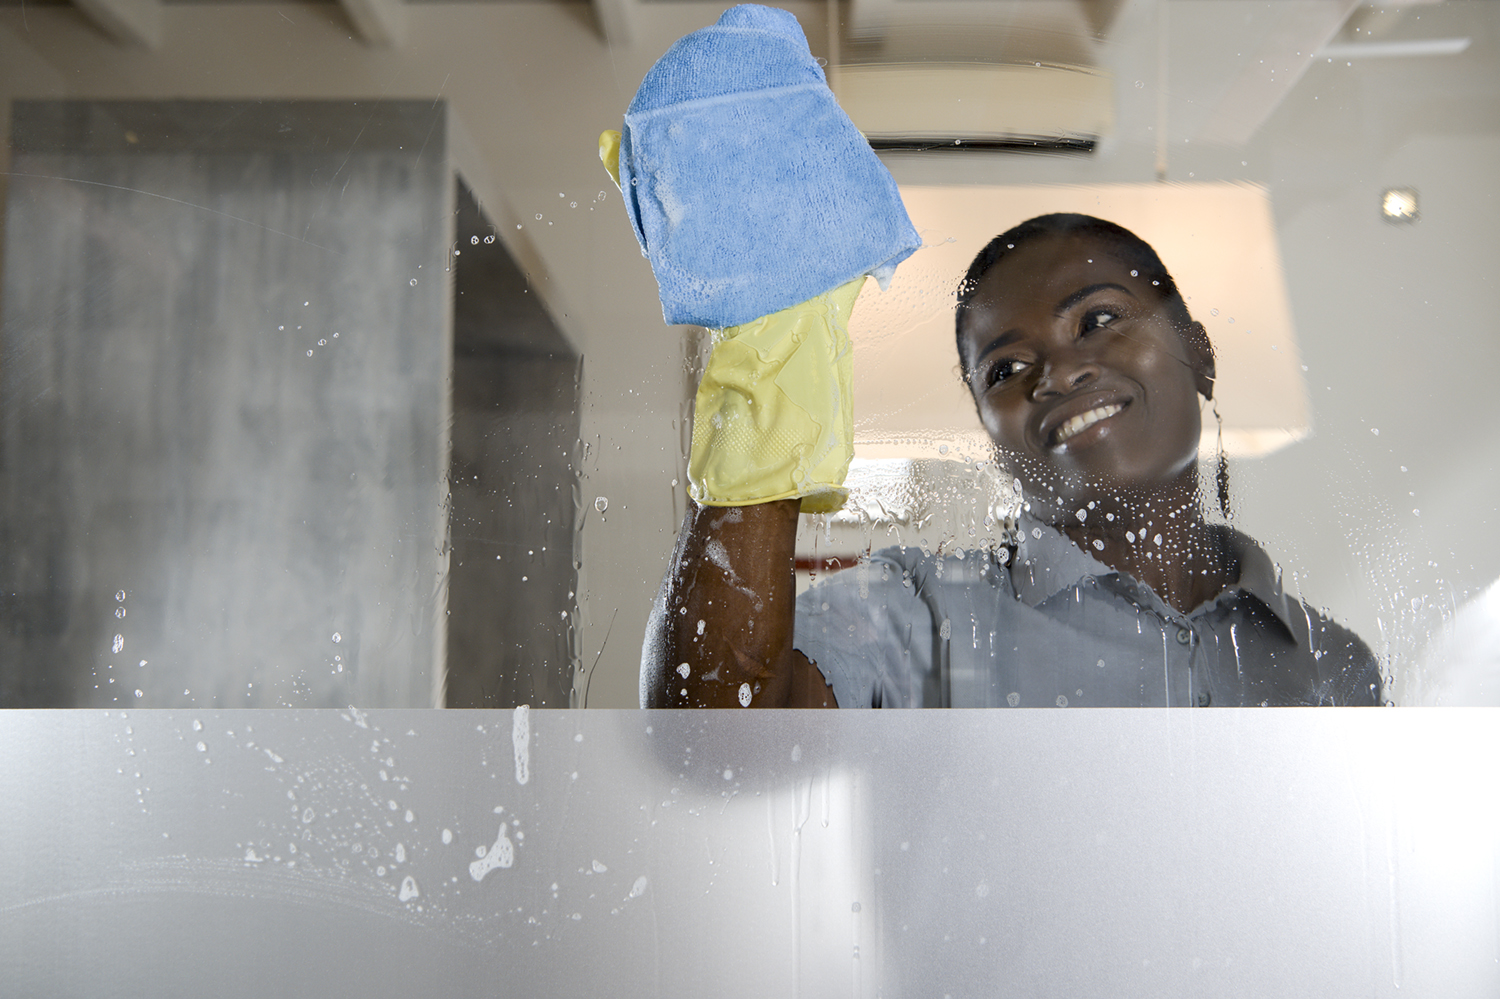 7 points to consider when hiring a cleaner for your home